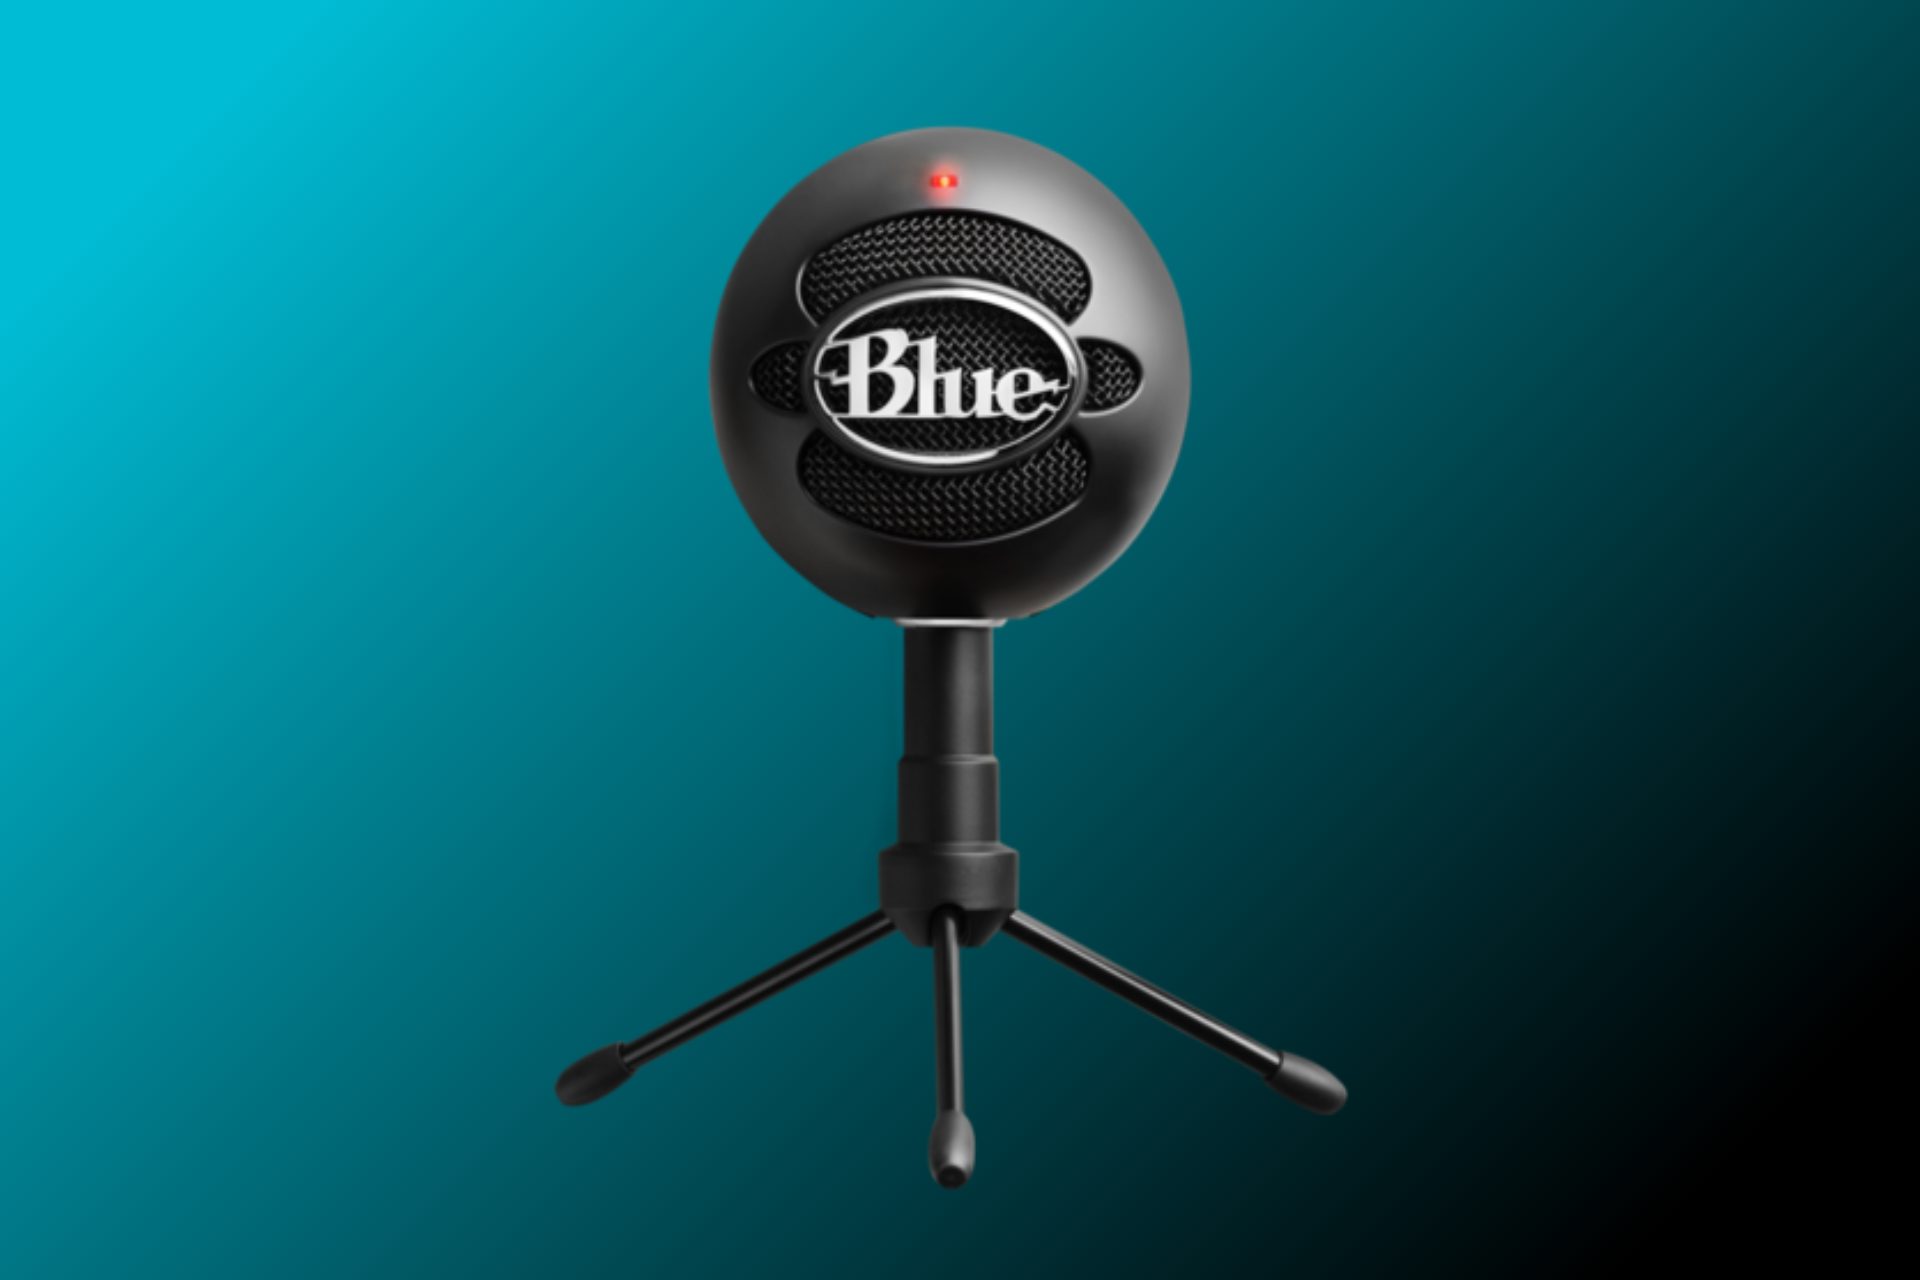 Blue Snowball mic issues